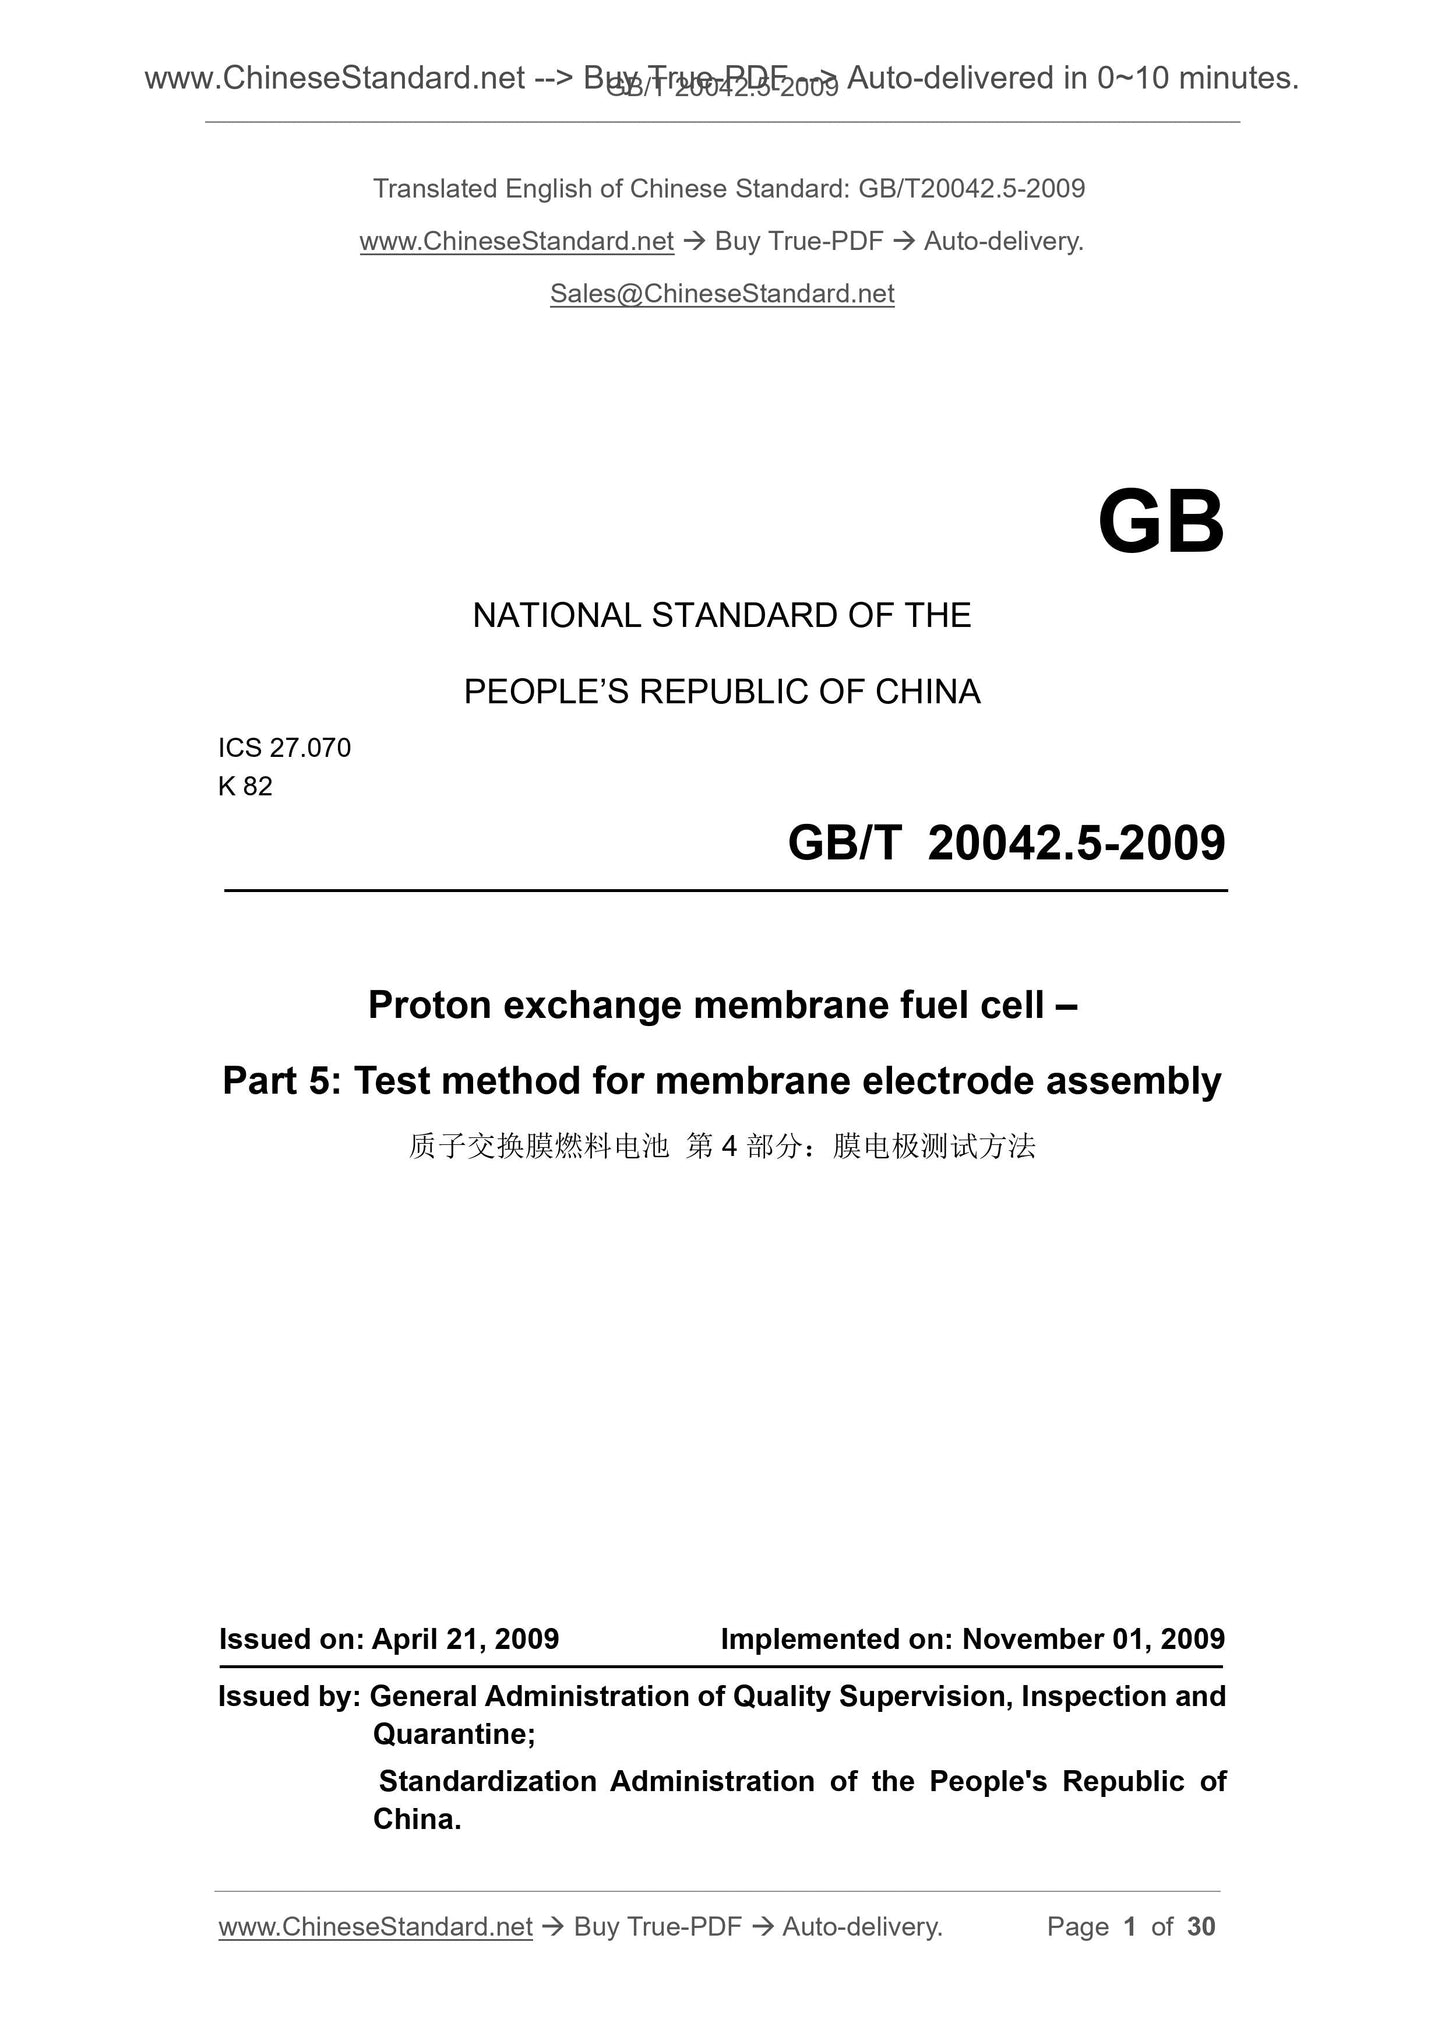 GB/T 20042.5-2009 Page 1